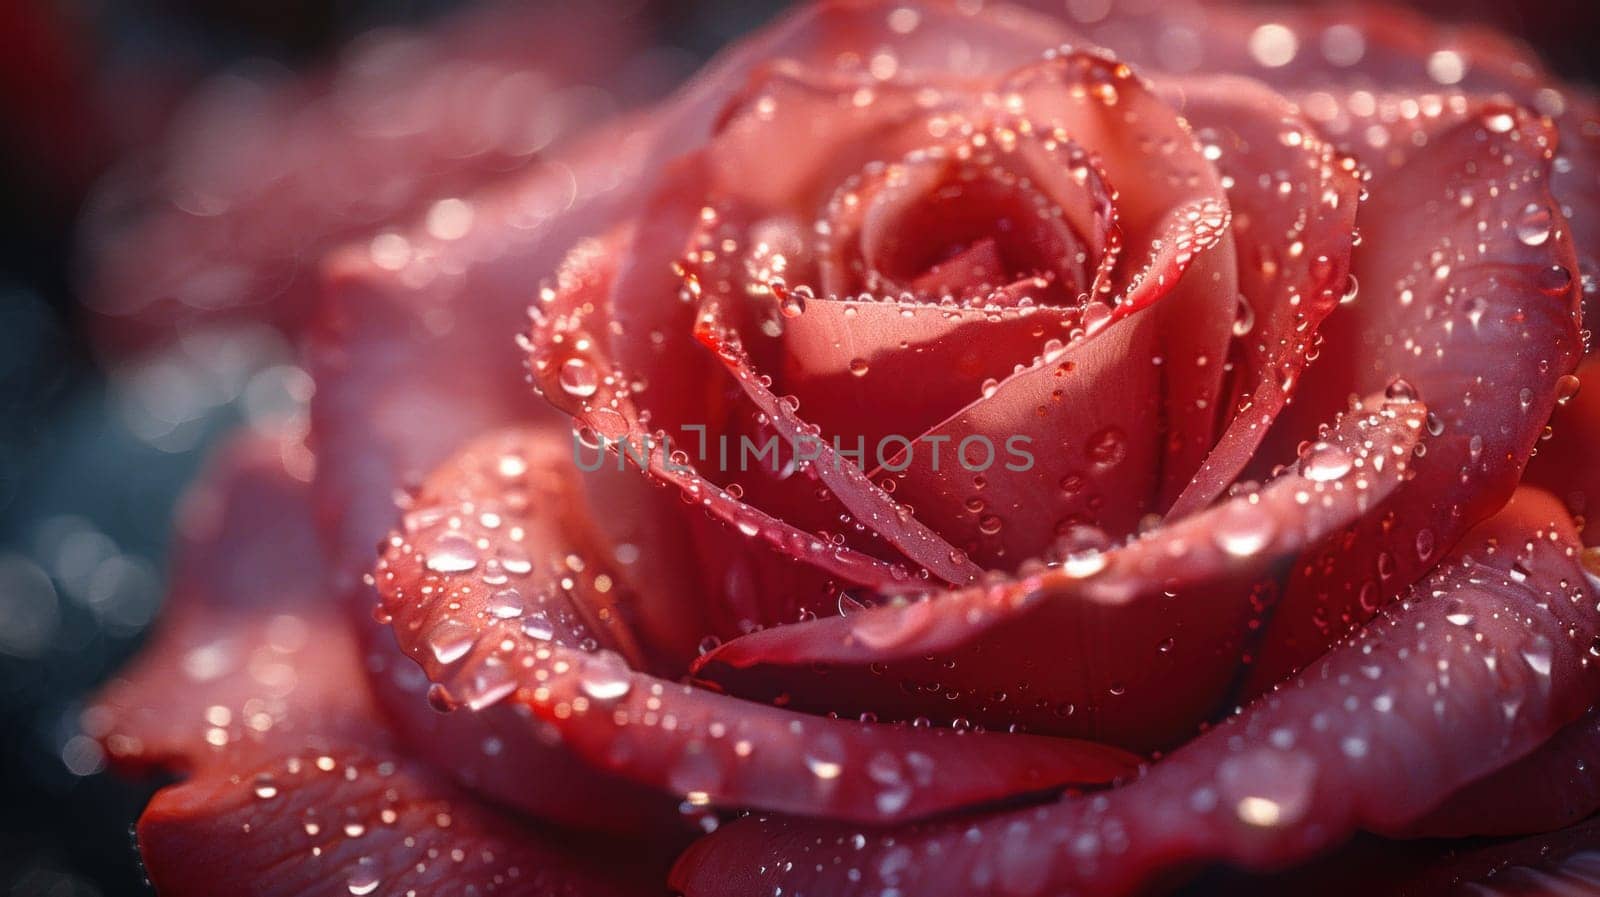 A red rose covered in water droplets.